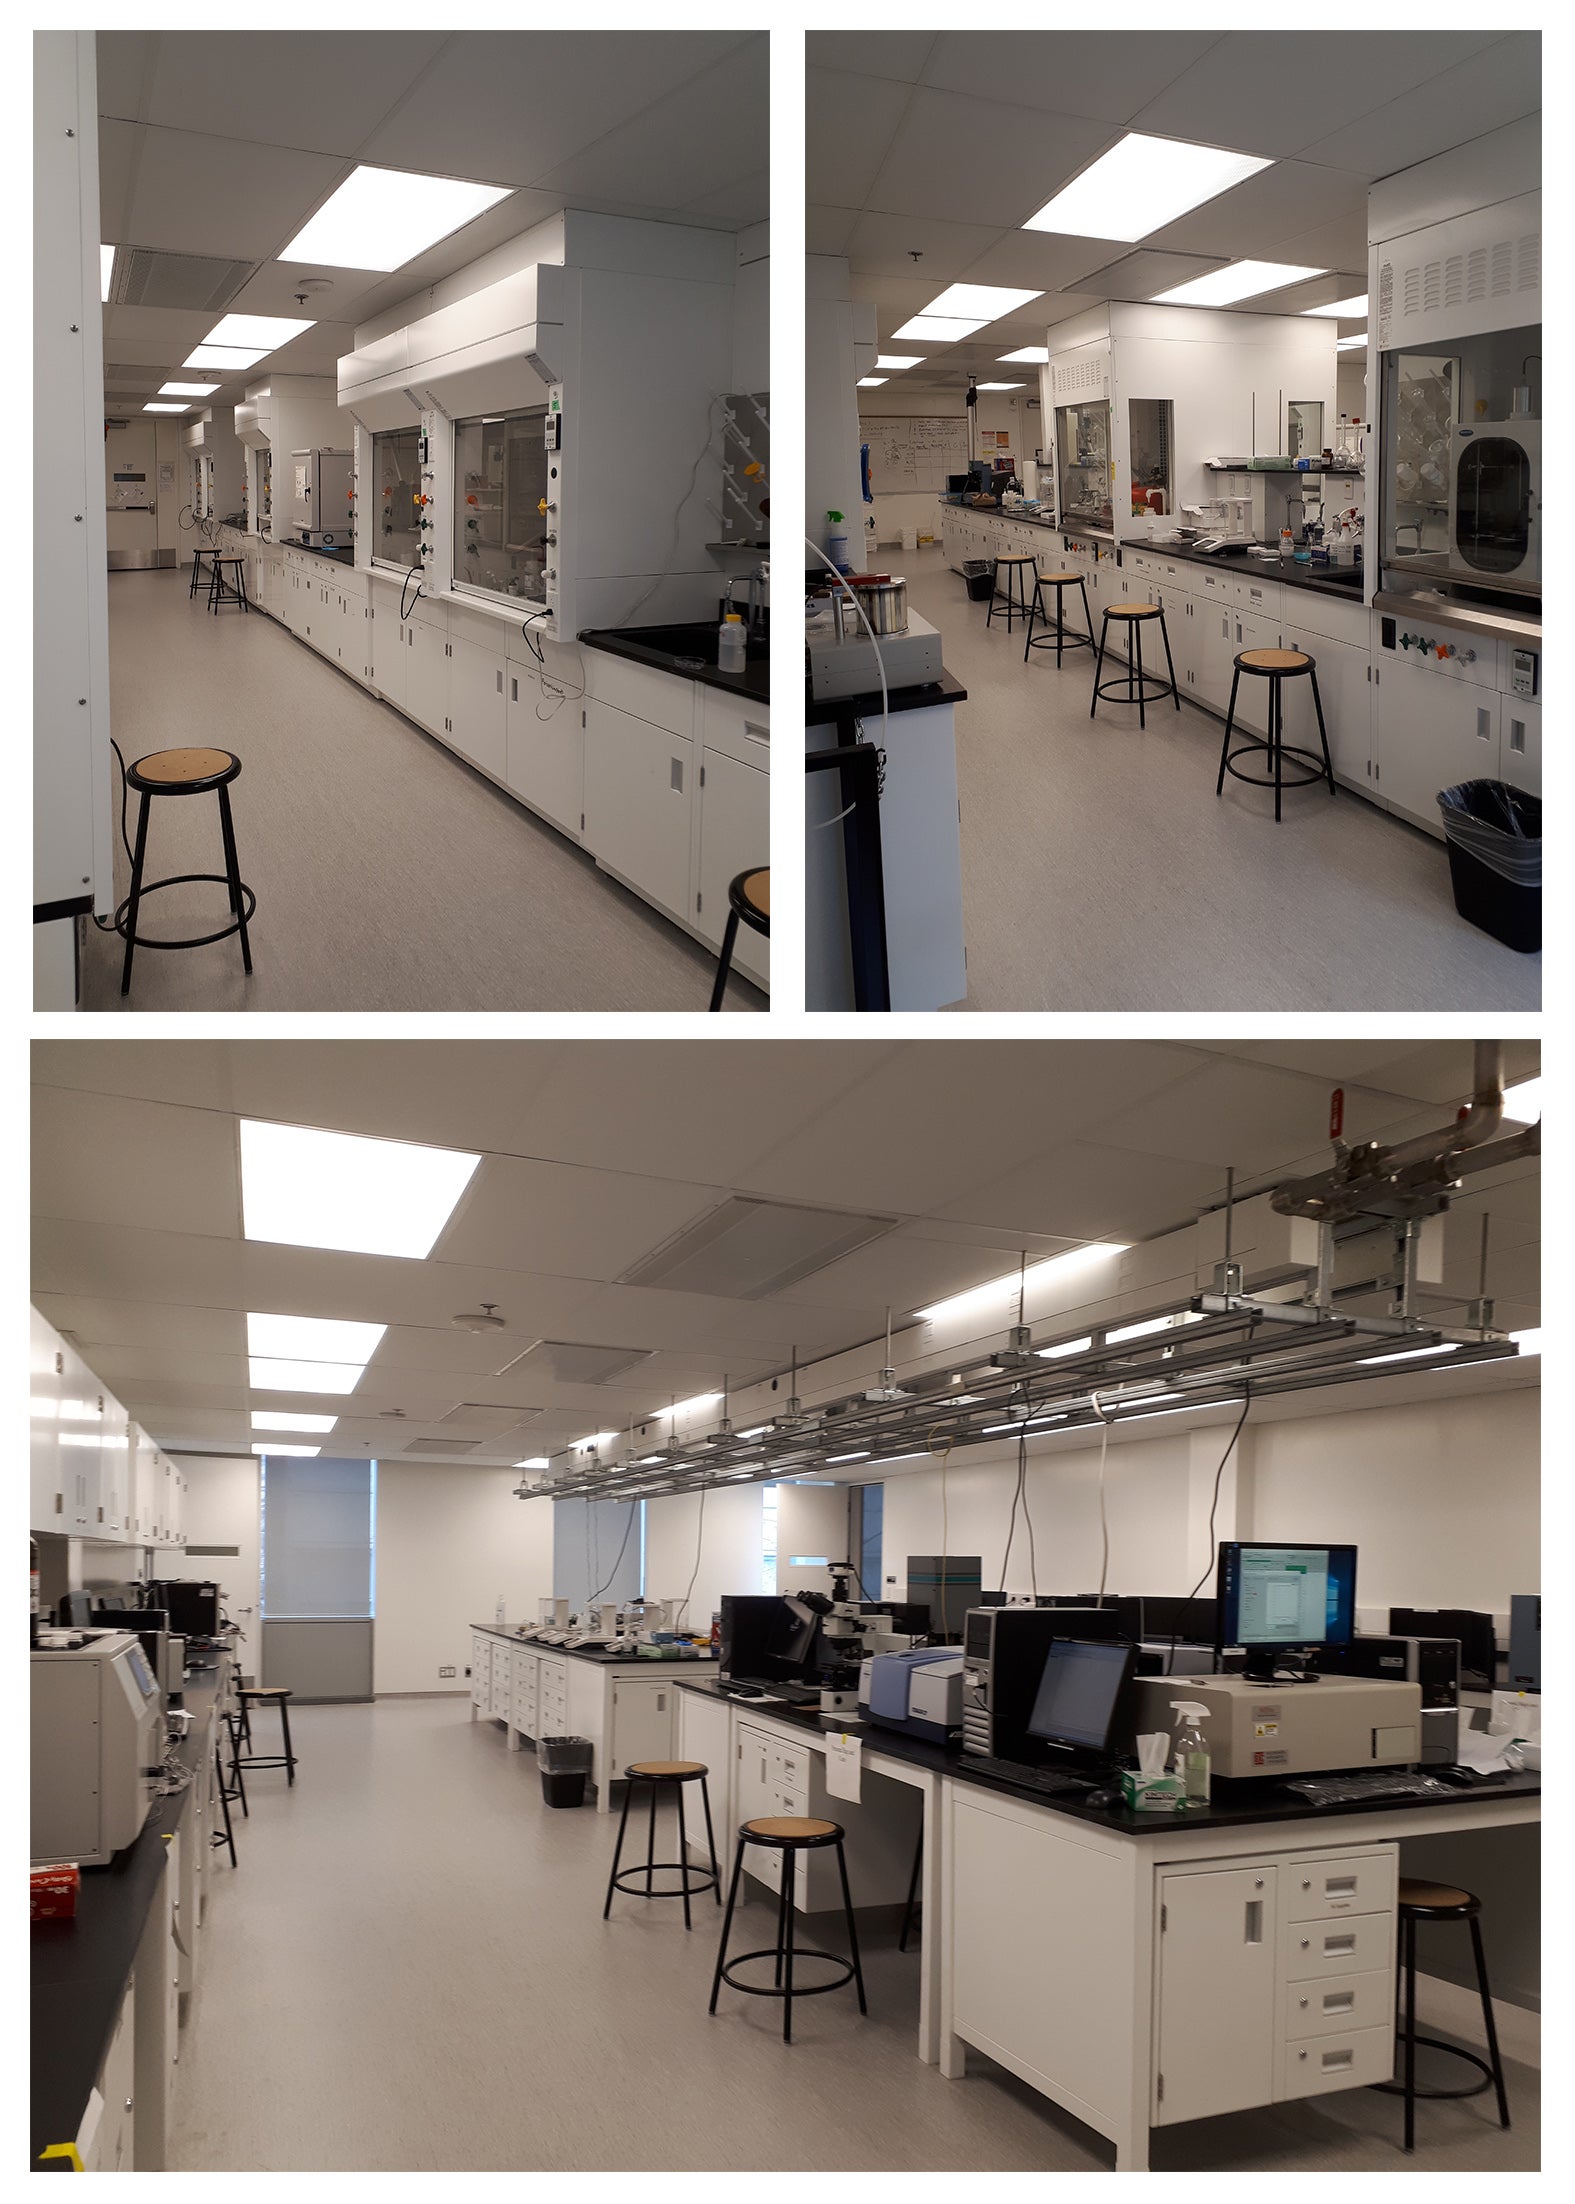 The Nanotechnology lab facilities, fume hoods and analytical instruments.